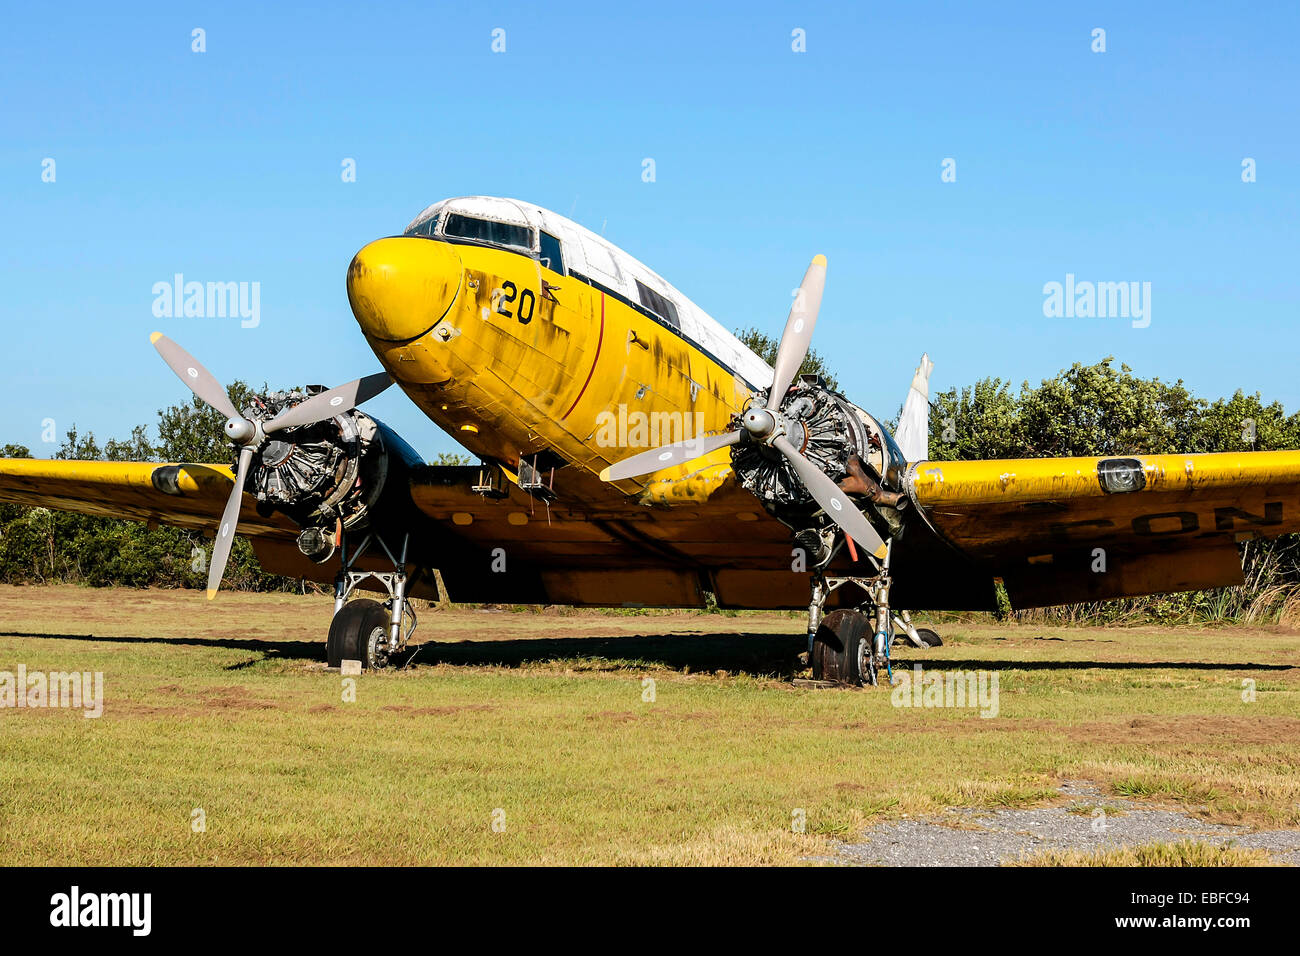 An old yellow painted Douglas DC-3 awaiting restoration or scrapping at an aviation junkyard in Florida Stock Photo